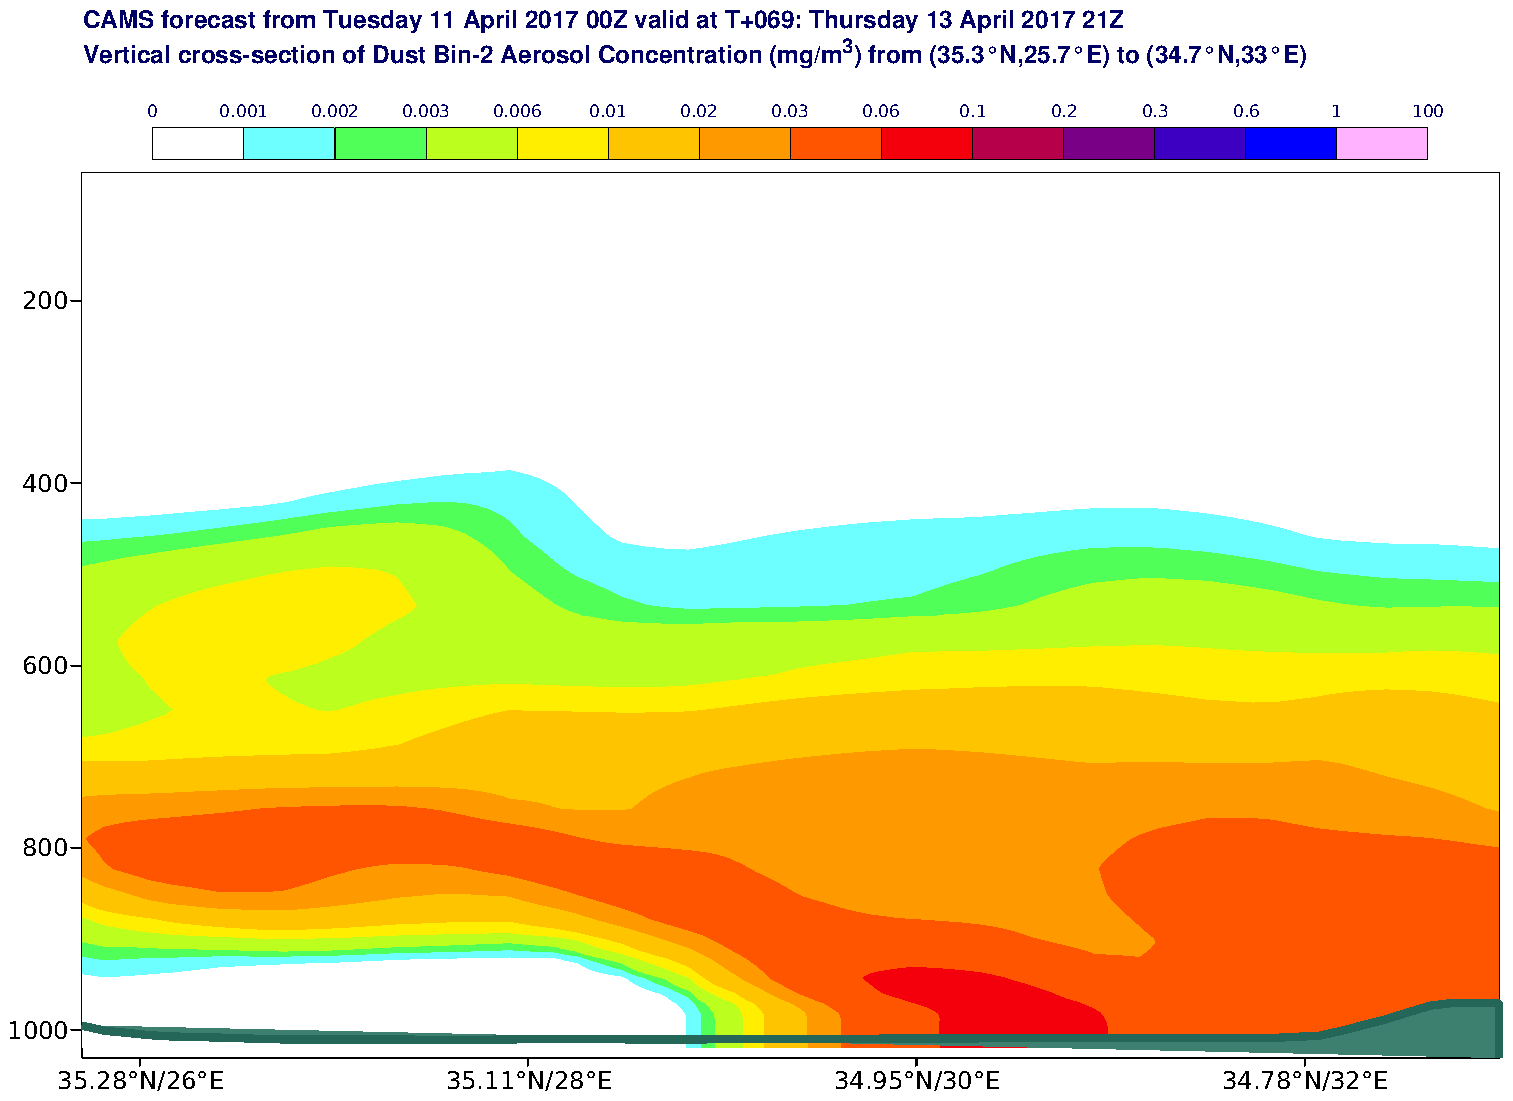 Vertical cross-section of Dust Bin-2 Aerosol Concentration (mg/m3) valid at T69 - 2017-04-13 21:00